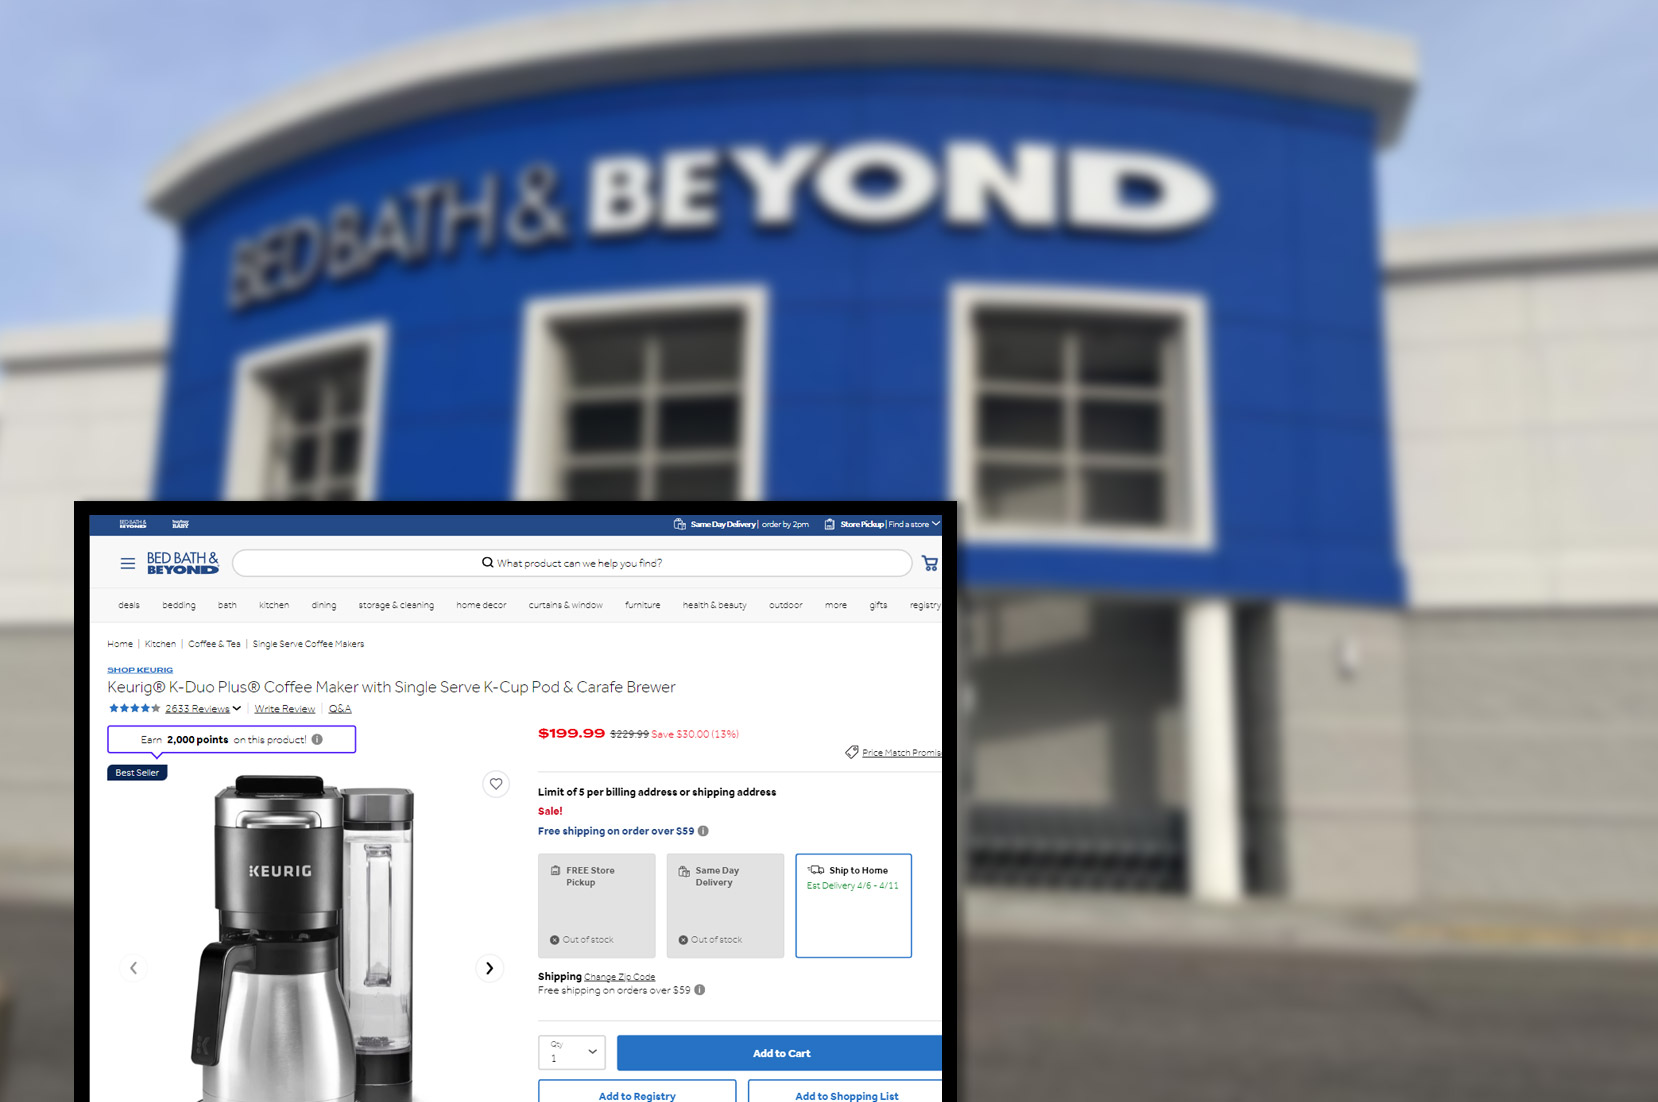 bedbathandbeyond-comproduct-pricing-information-and-image-scraping-services